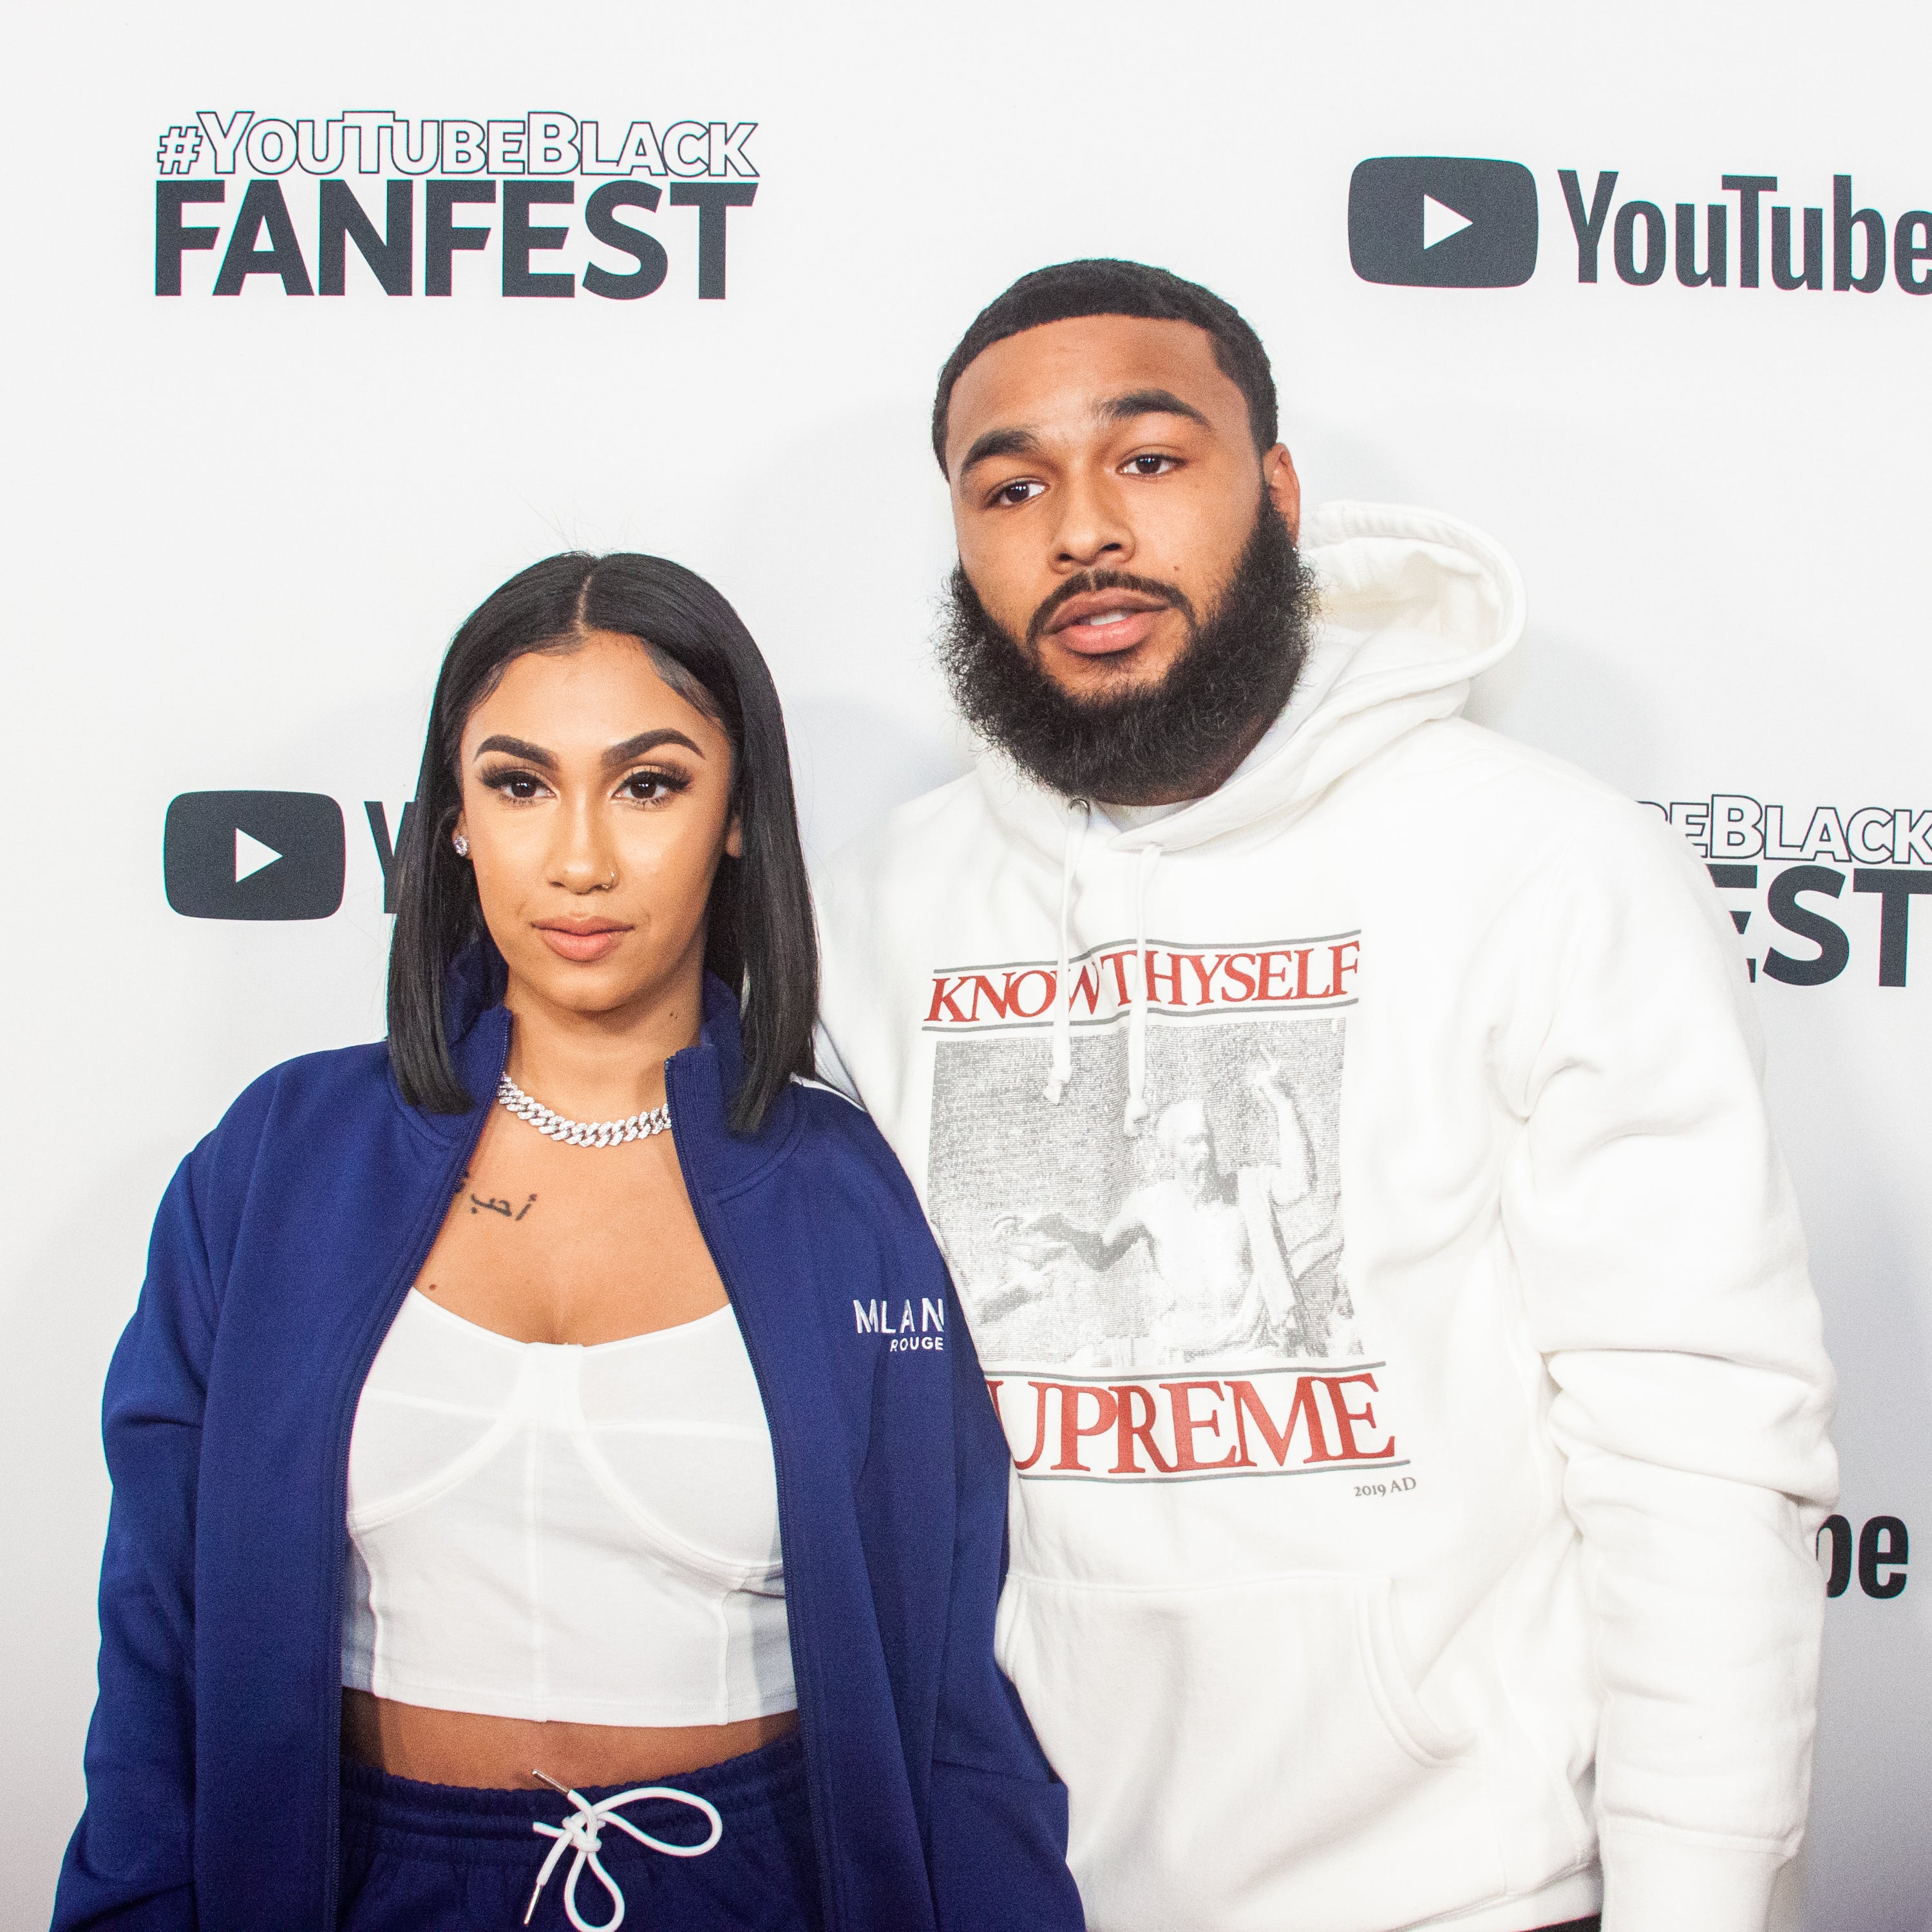 Celebrities And Influencers Were Fresh-Faced At #YouTubeBlack FanFest